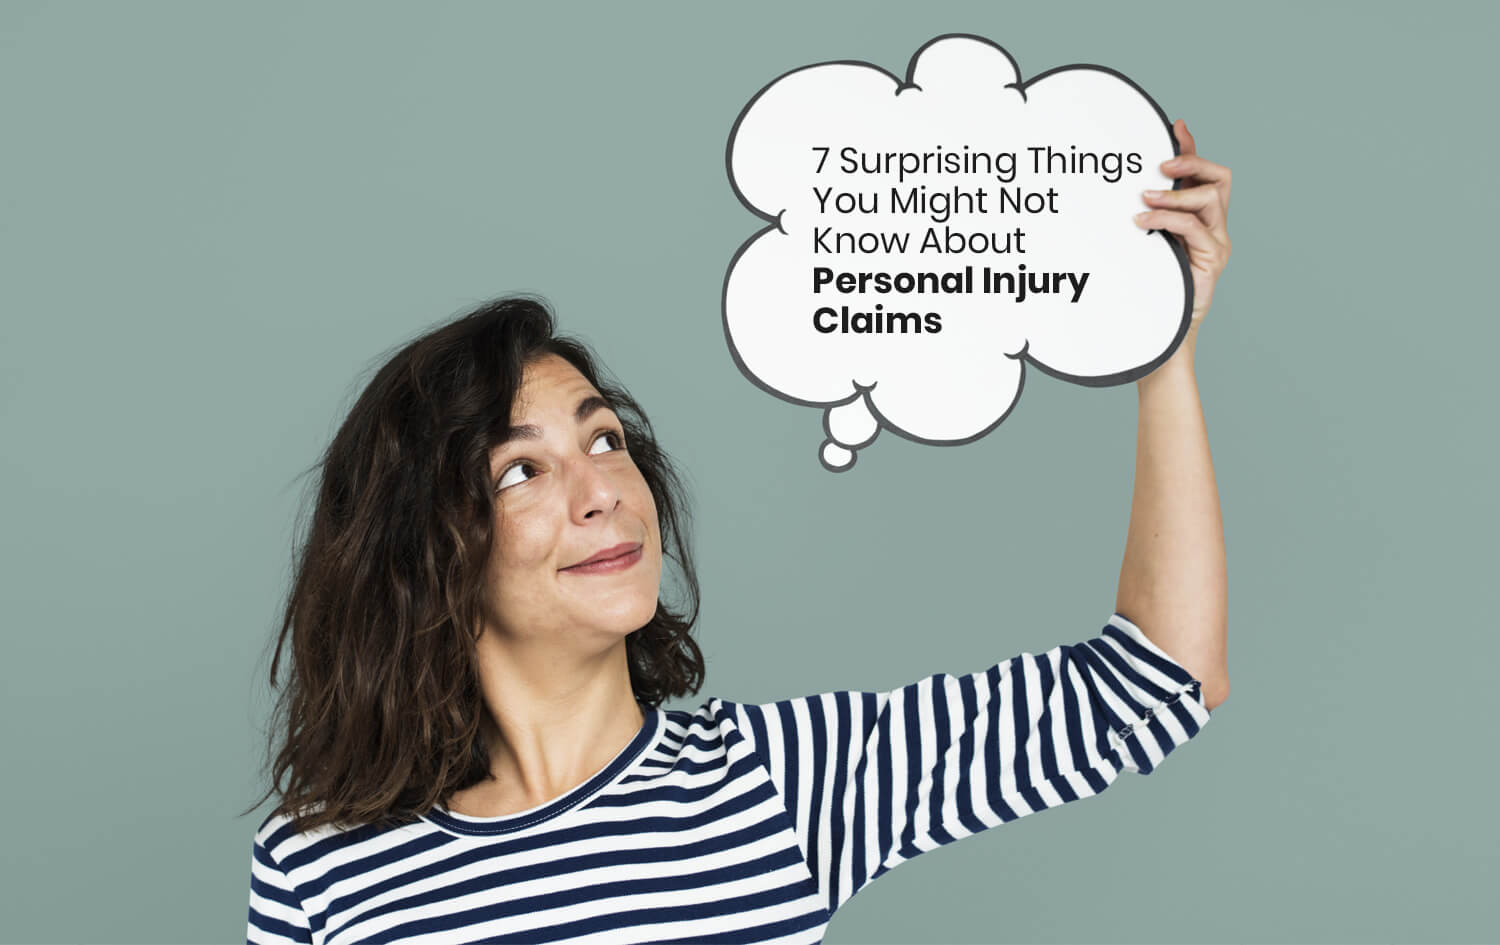 7 surprising things you might not know about personal injury claims